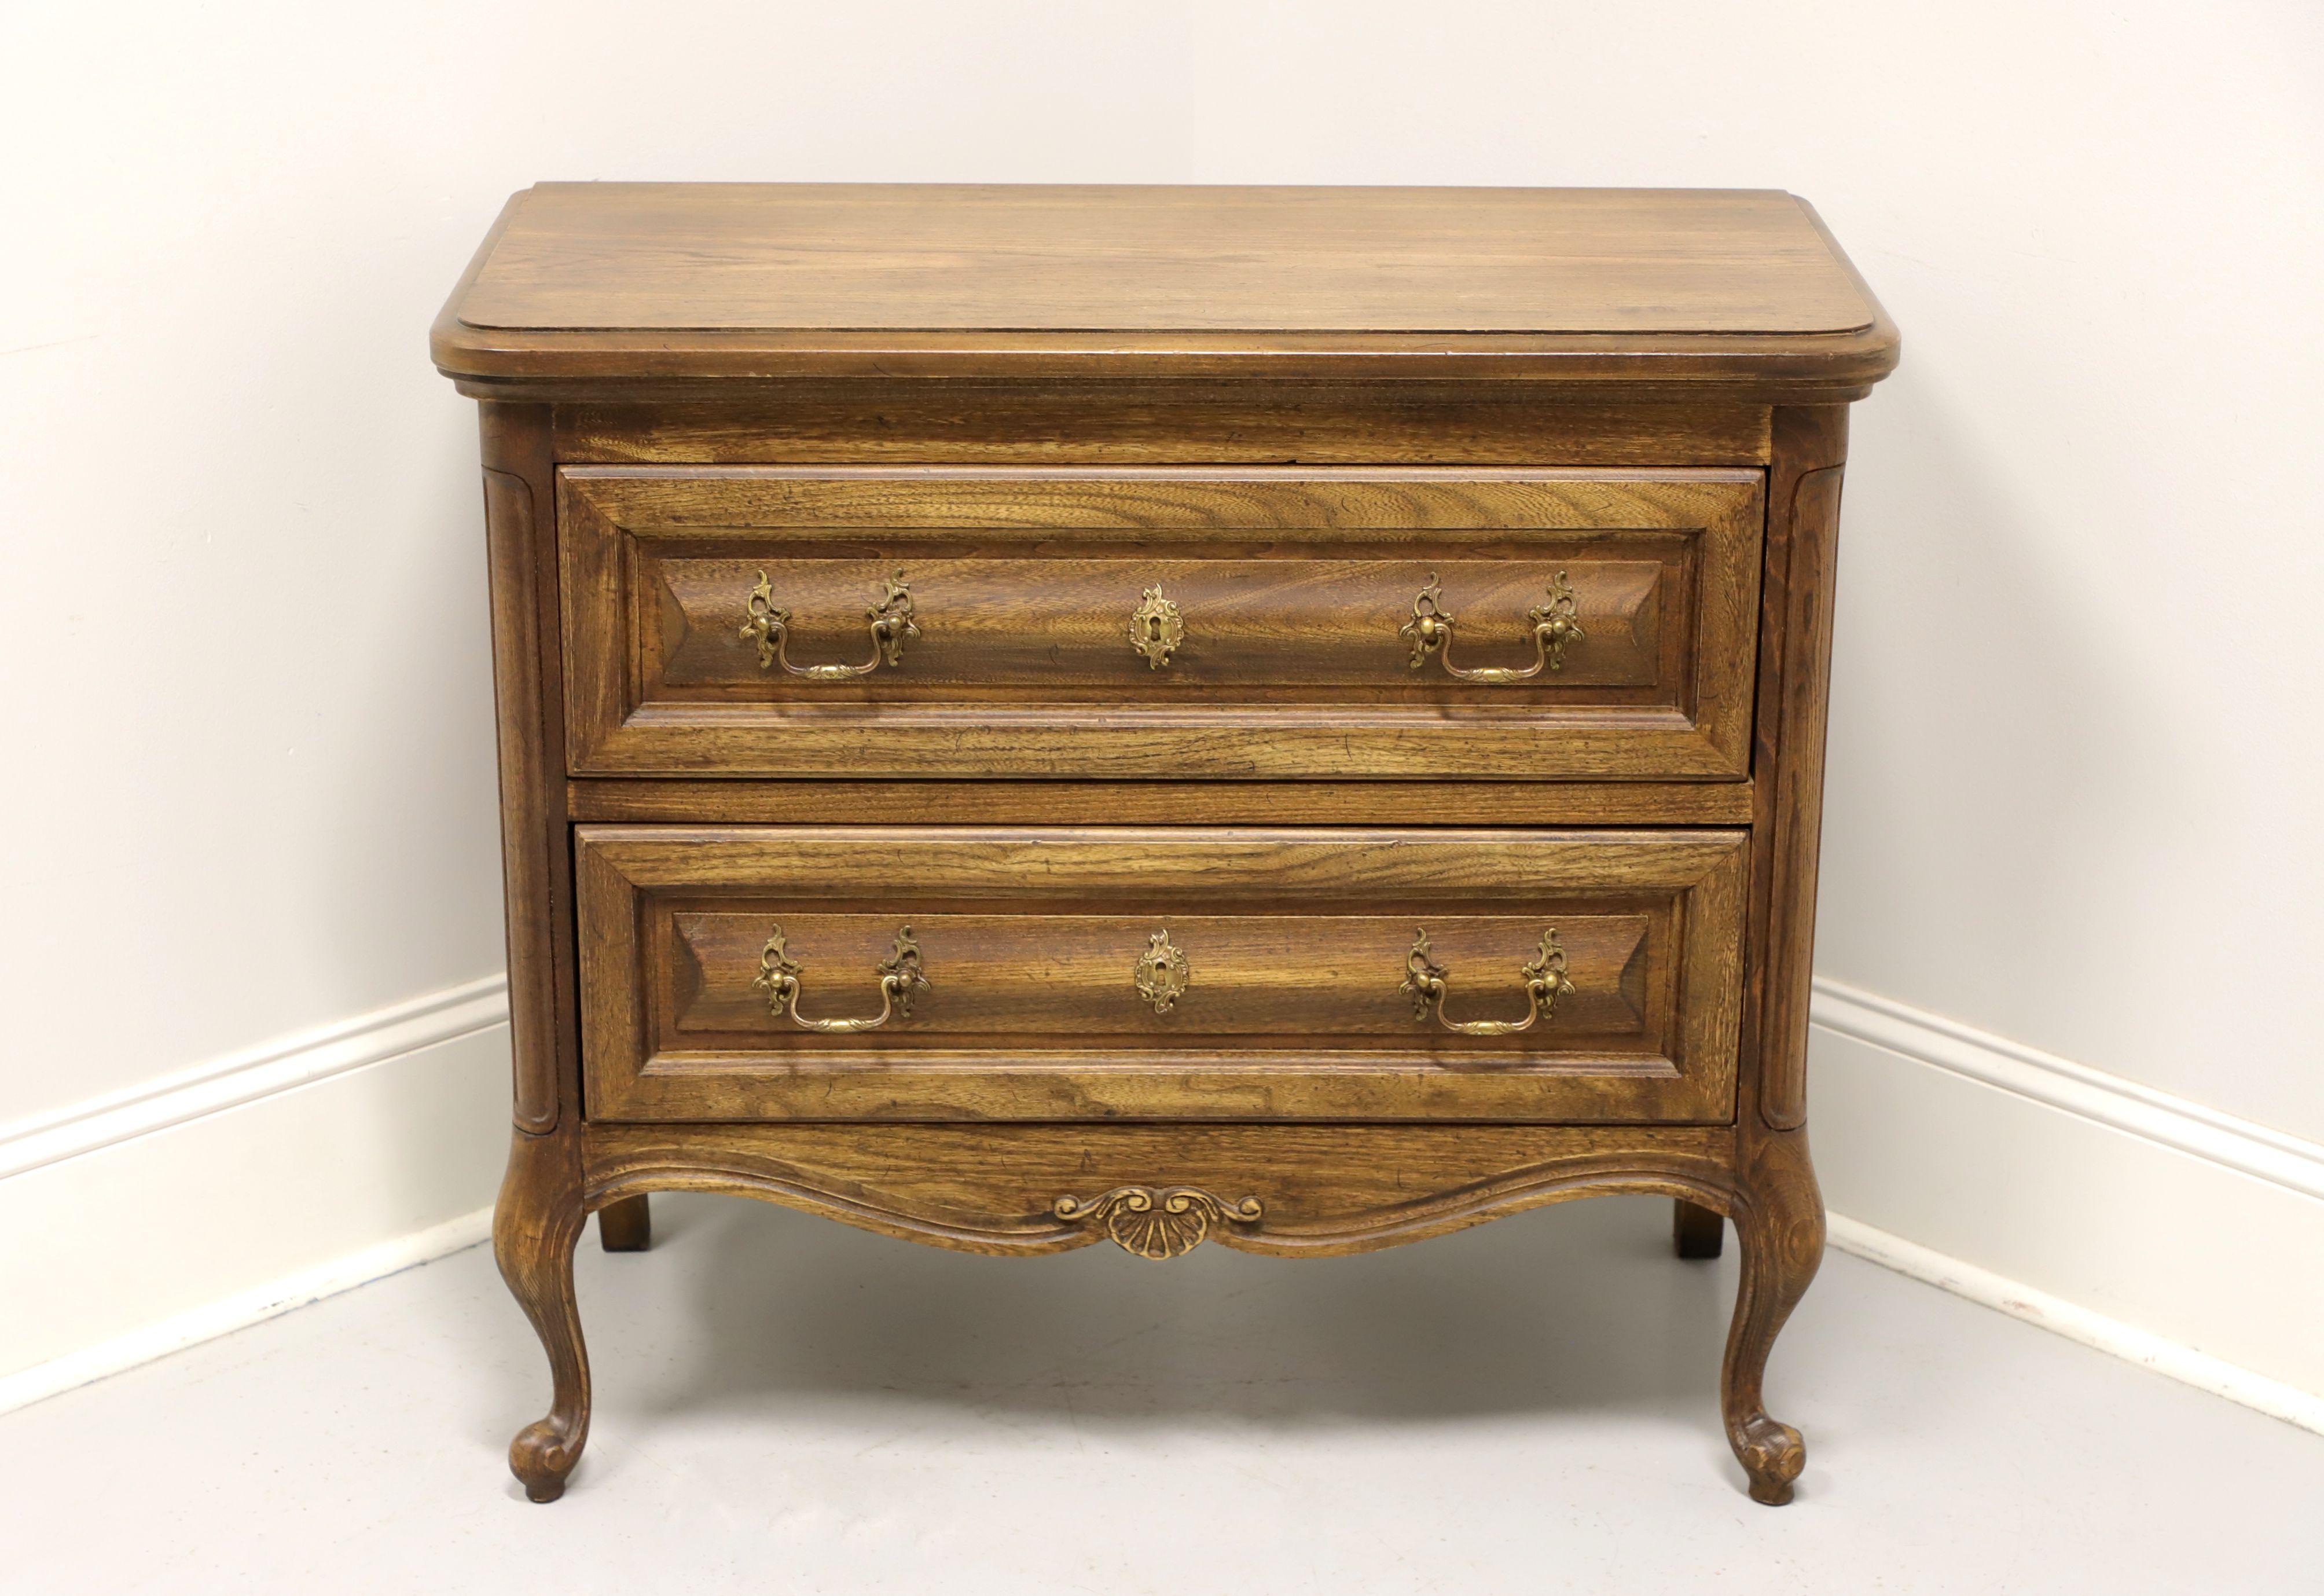 A French Country style occasional chest, unbranded, similar quality to Century or Henredon. Solid oak with brass hardware, carved apron, slender curved front legs and scroll feet. Features two drawers of dovetail construction with faux keyhole